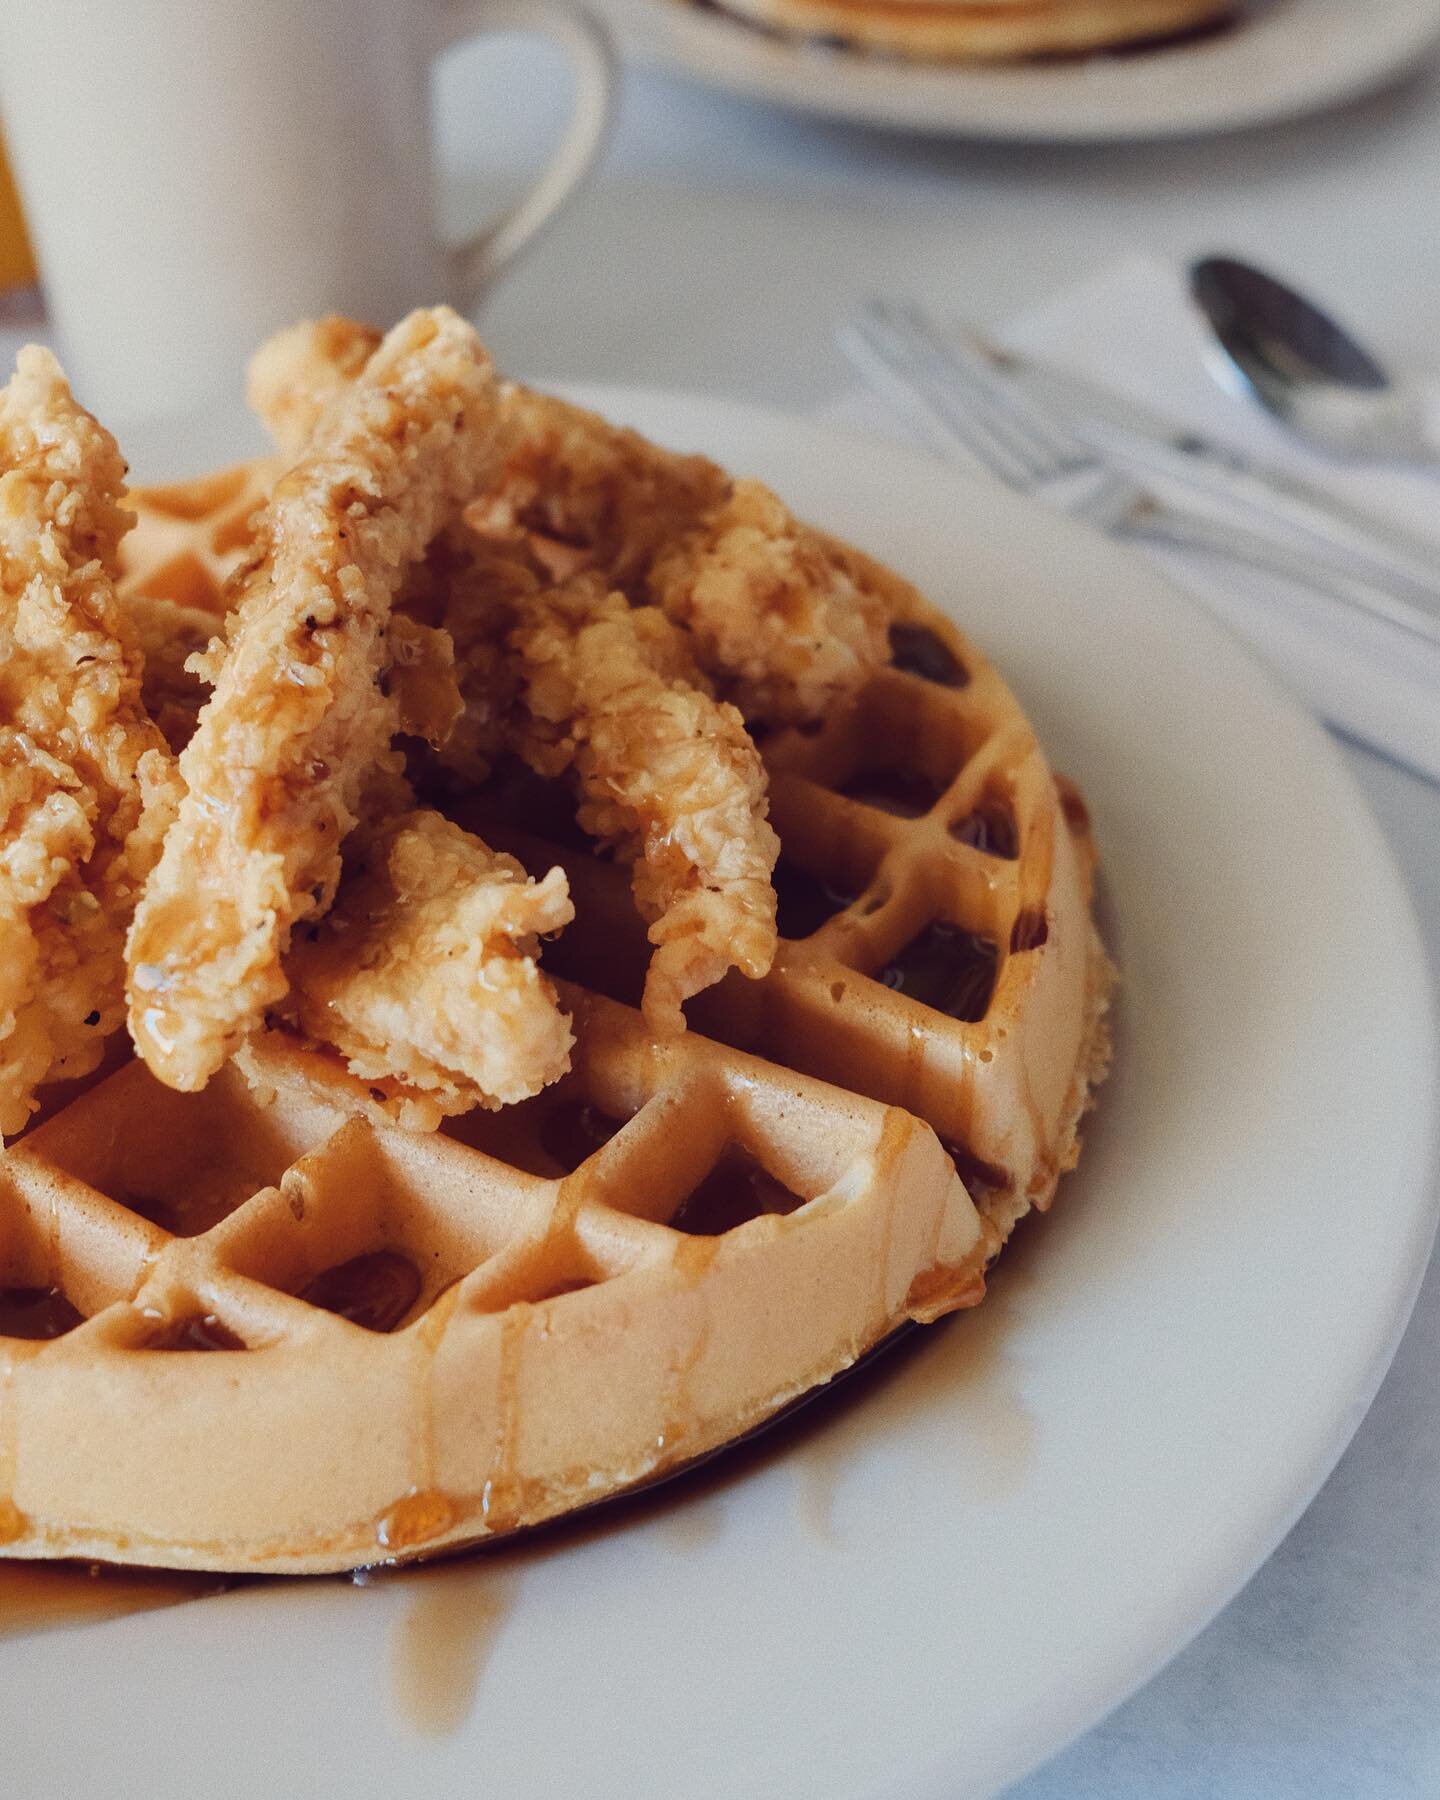 Sweet Saturday! Our special today is Chicken + Waffles! Buttermilk-battered, crispy fried chicken on top a sweet Belgian waffle!